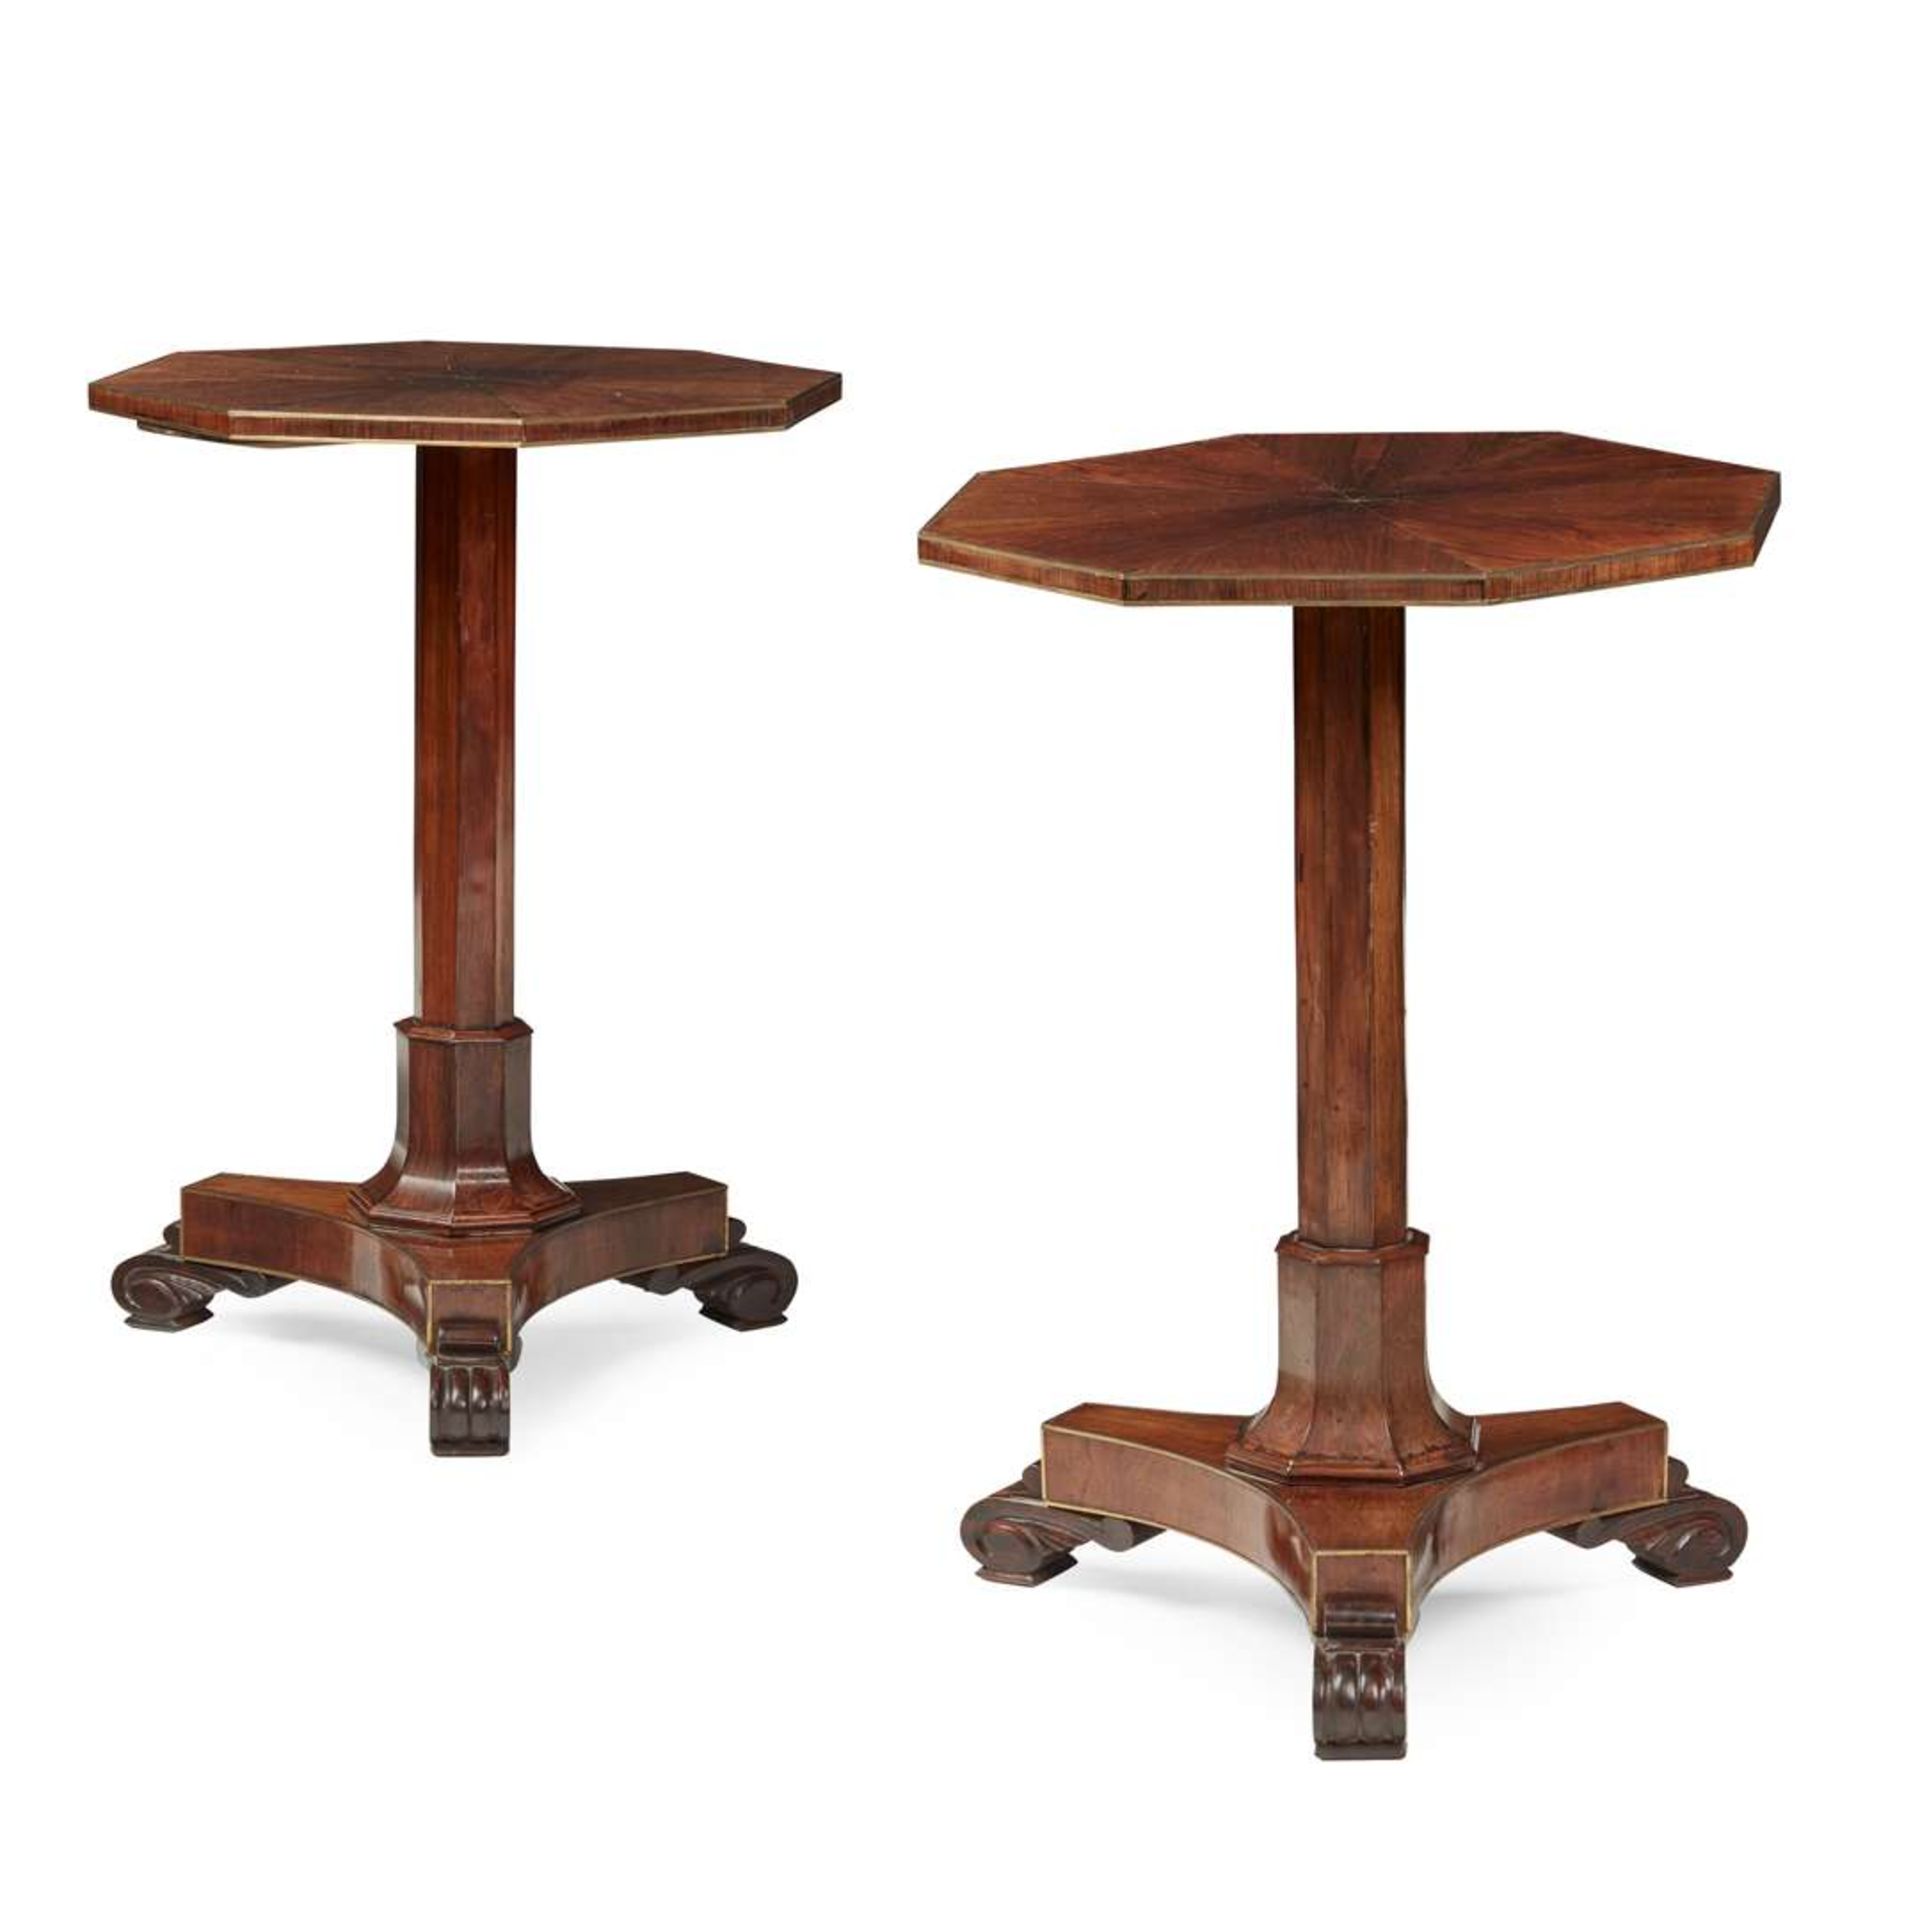 PAIR OF REGENCY ROSEWOOD AND BRASS INLAID OCCASIONAL TABLES